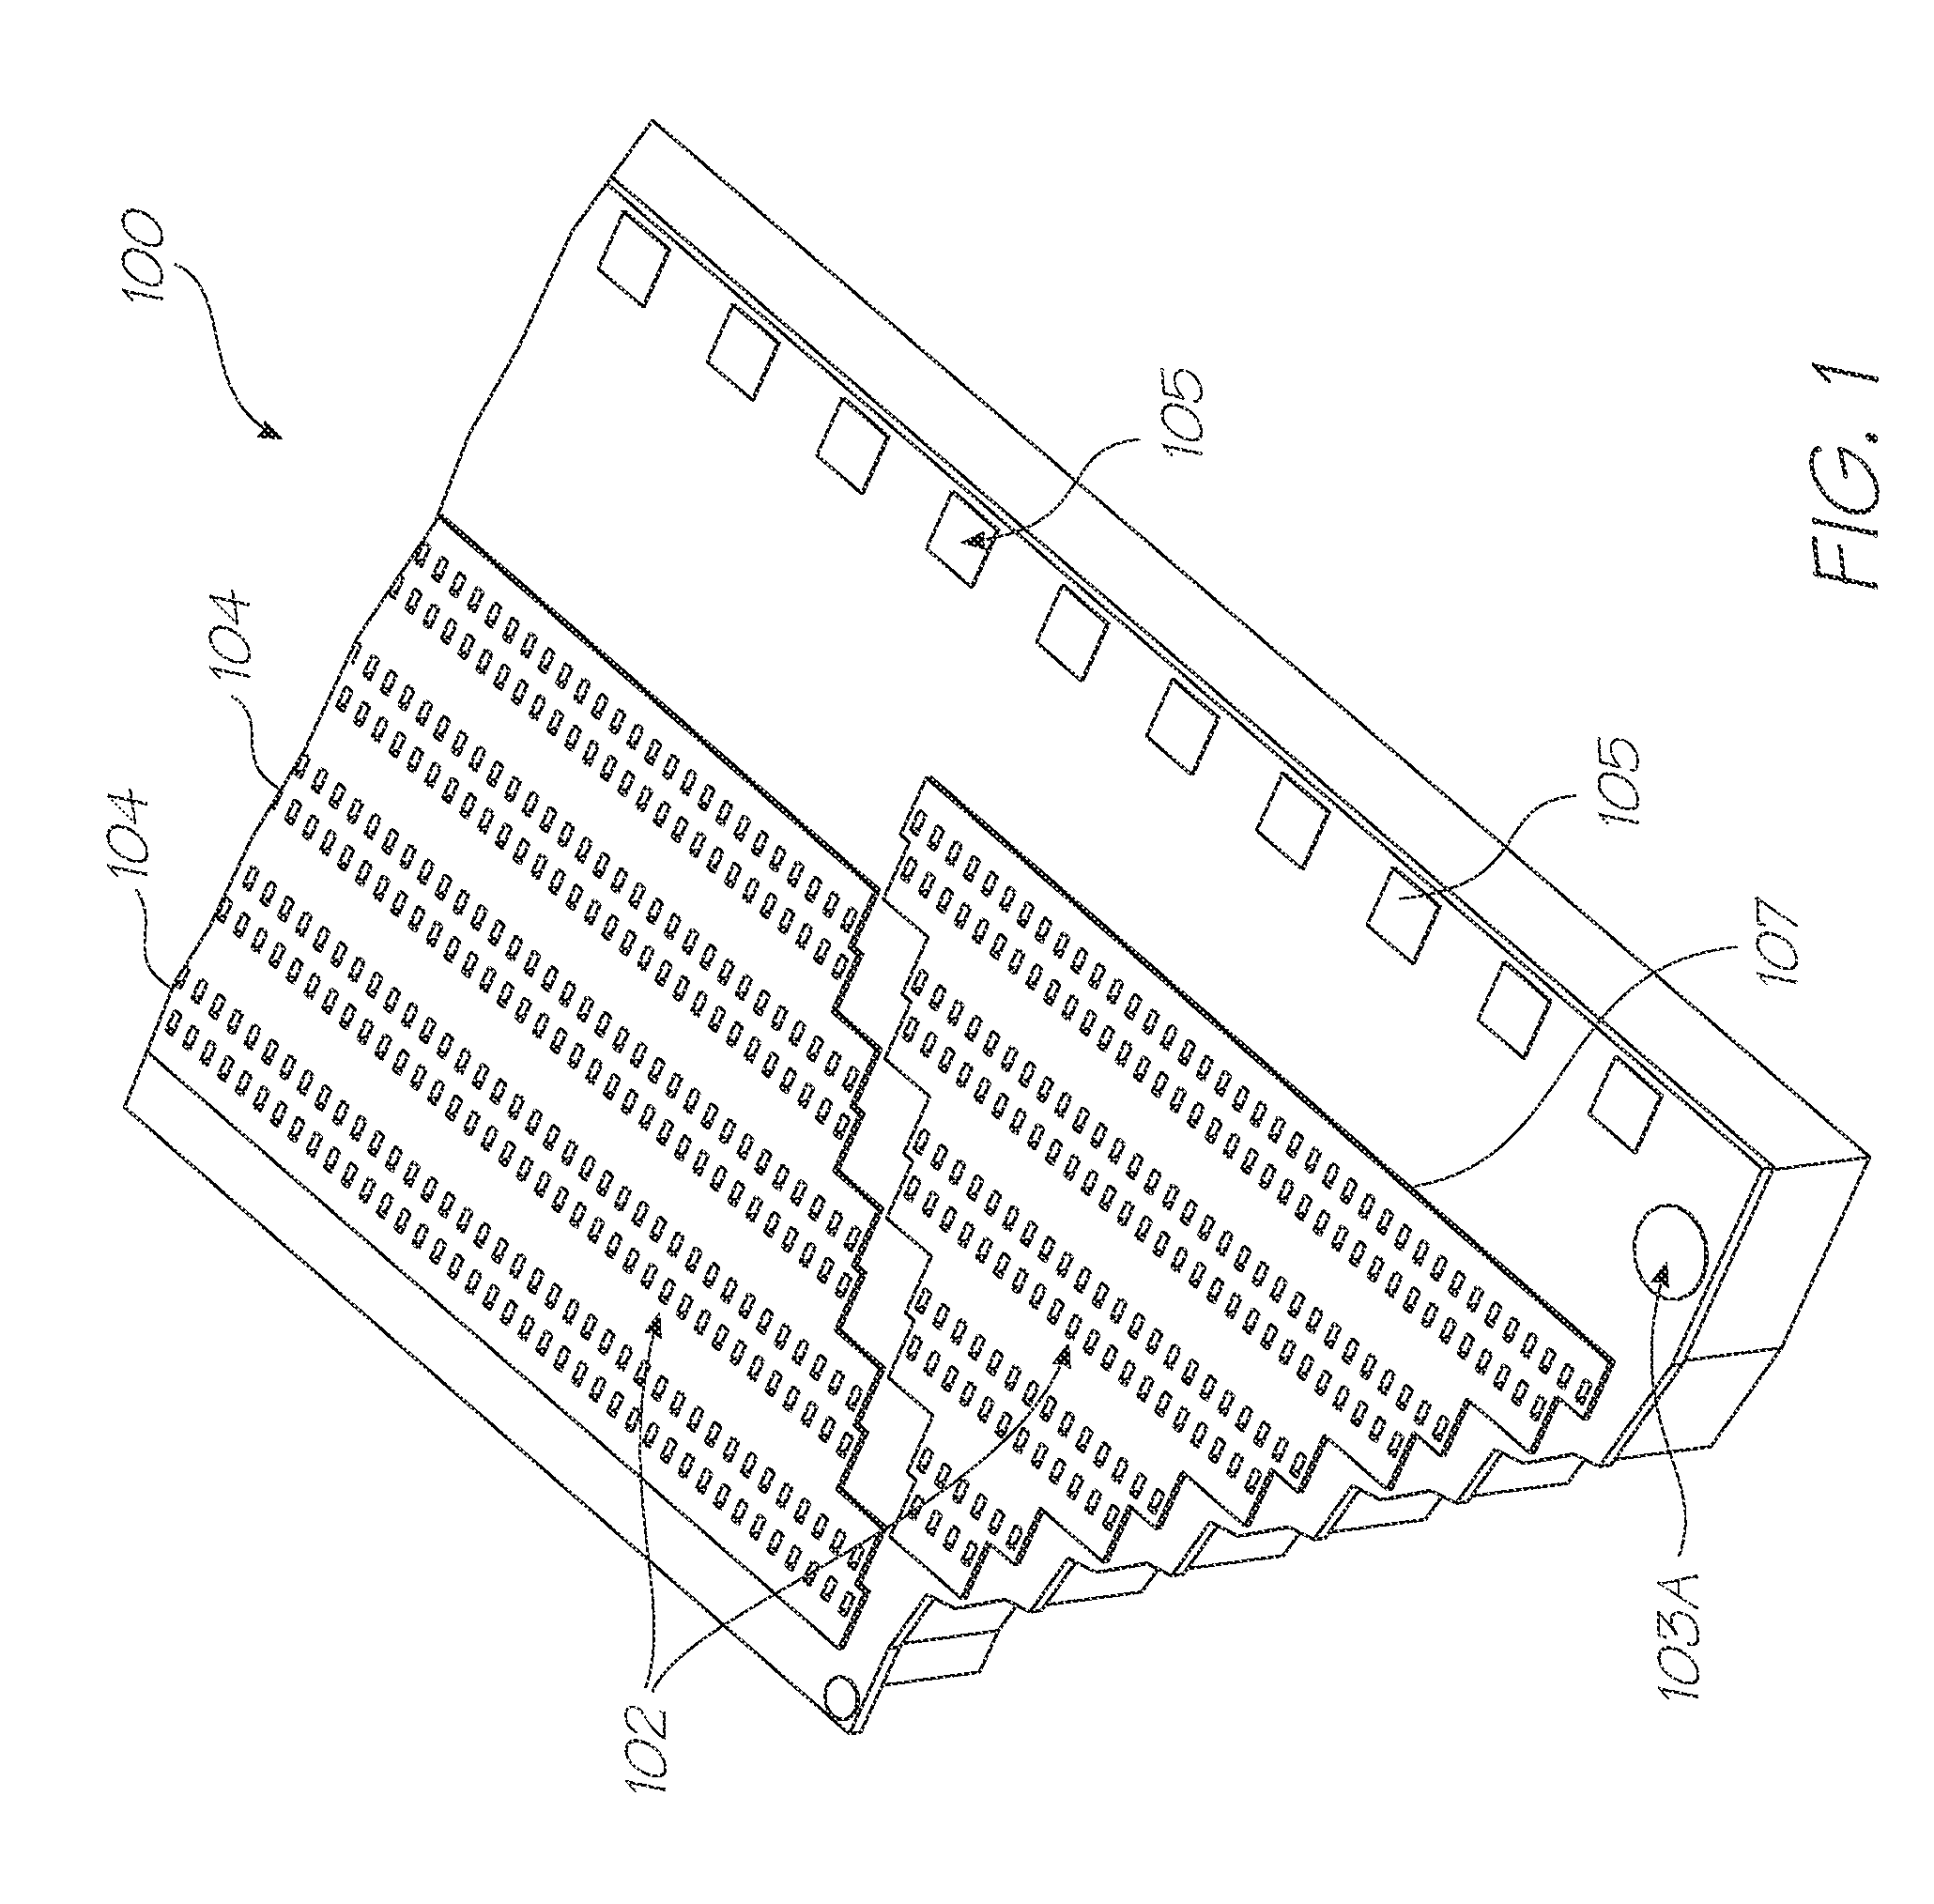 Method of providing printhead assembly having complementary hydrophilic and hydrophobic surfaces